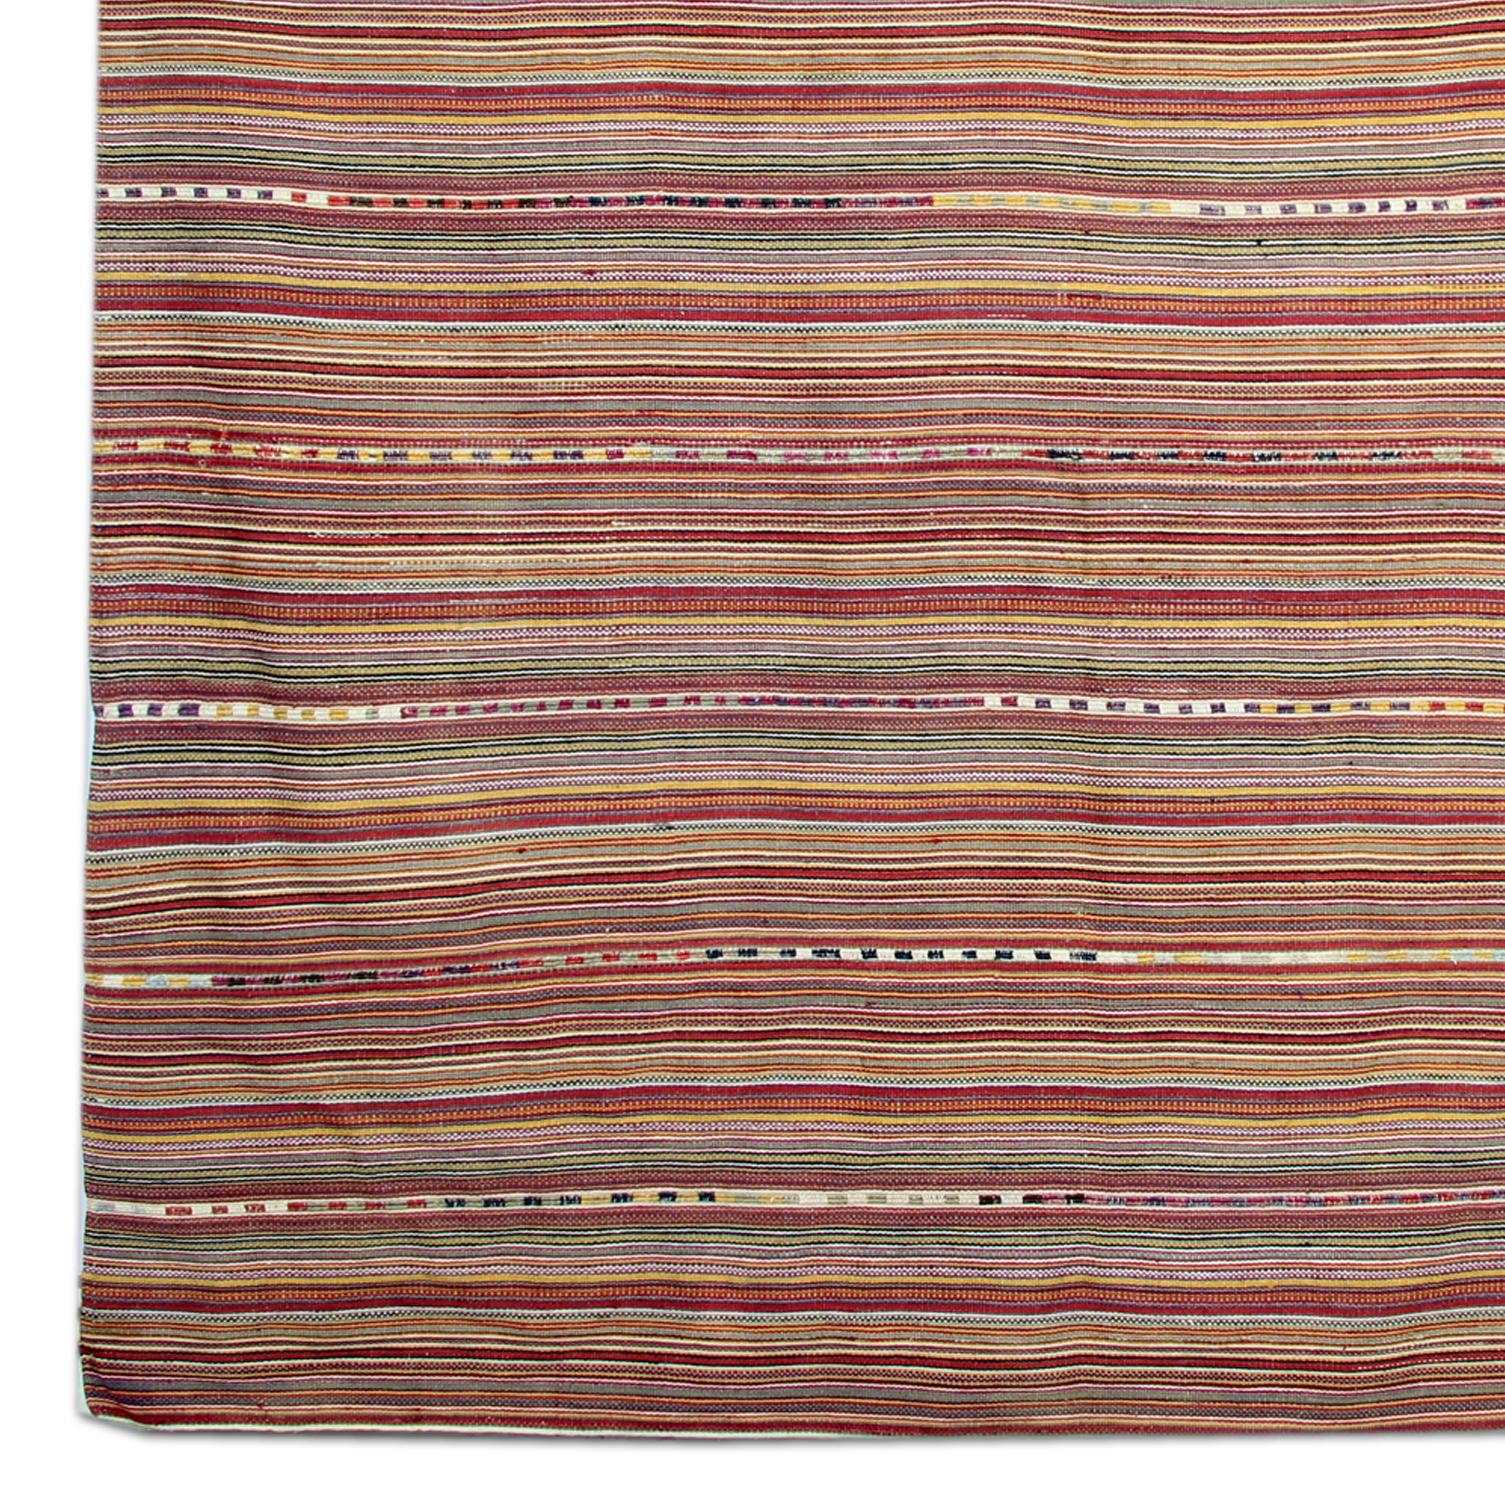 Handmade Kilim Rugs, Antique Wool Jajim, Striped Red Cream Wool Textile In Excellent Condition For Sale In Hampshire, GB